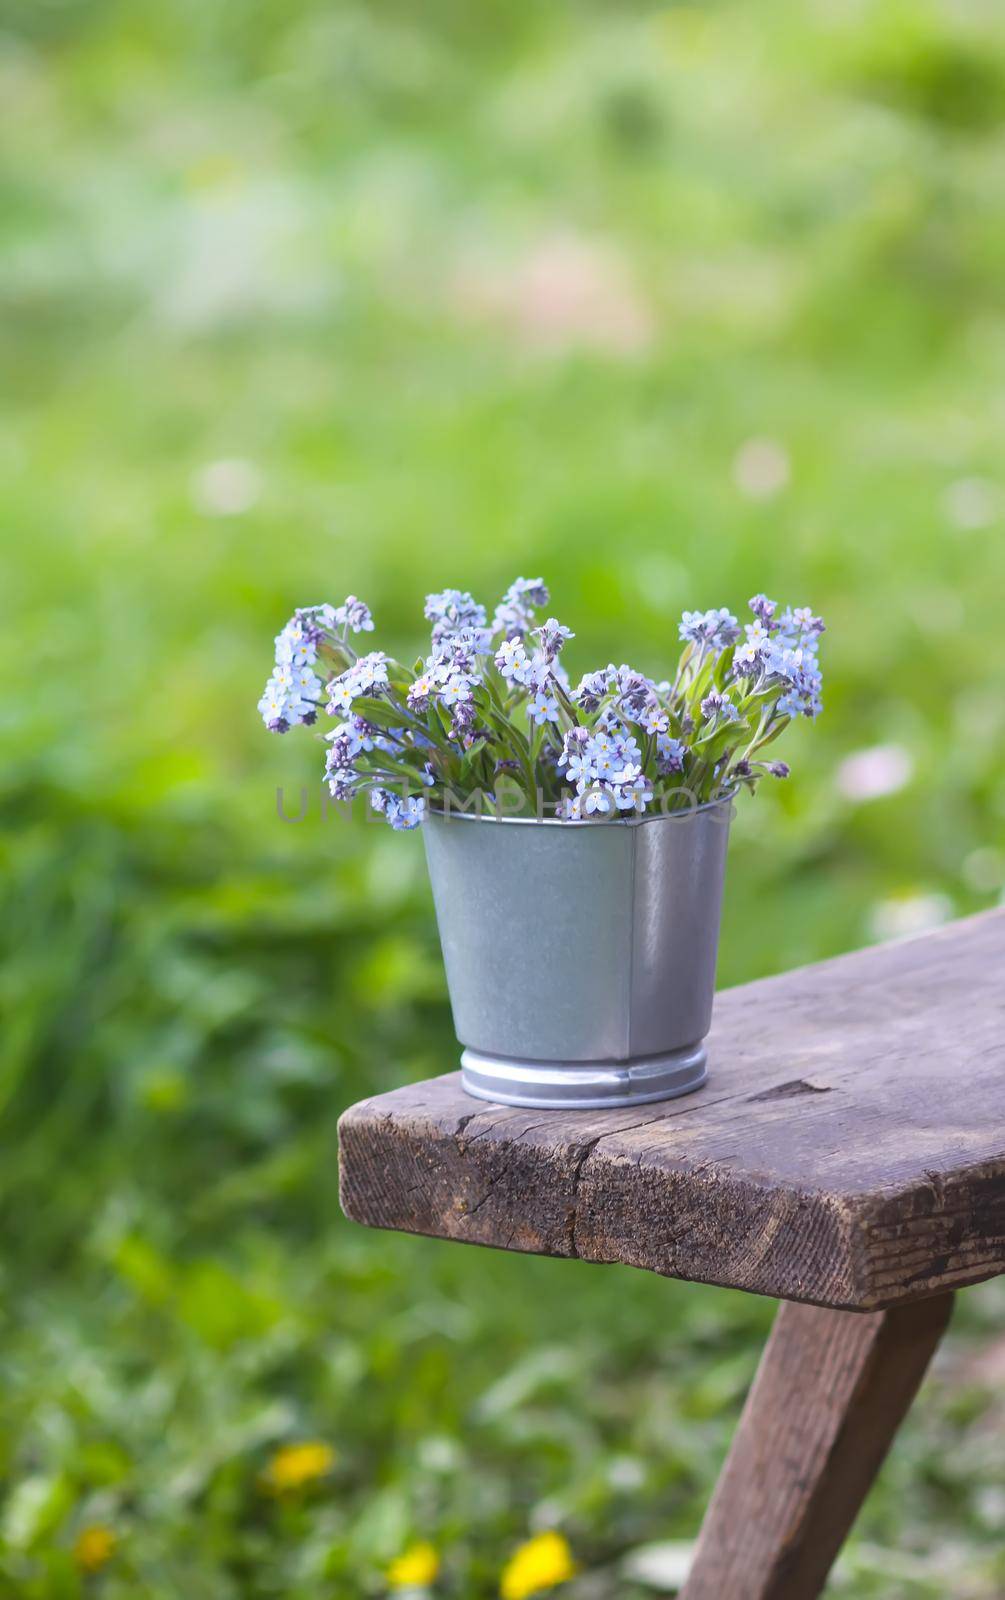 Forget-me-not blue spring garden flowers bouquet outdoors on the wooden bench